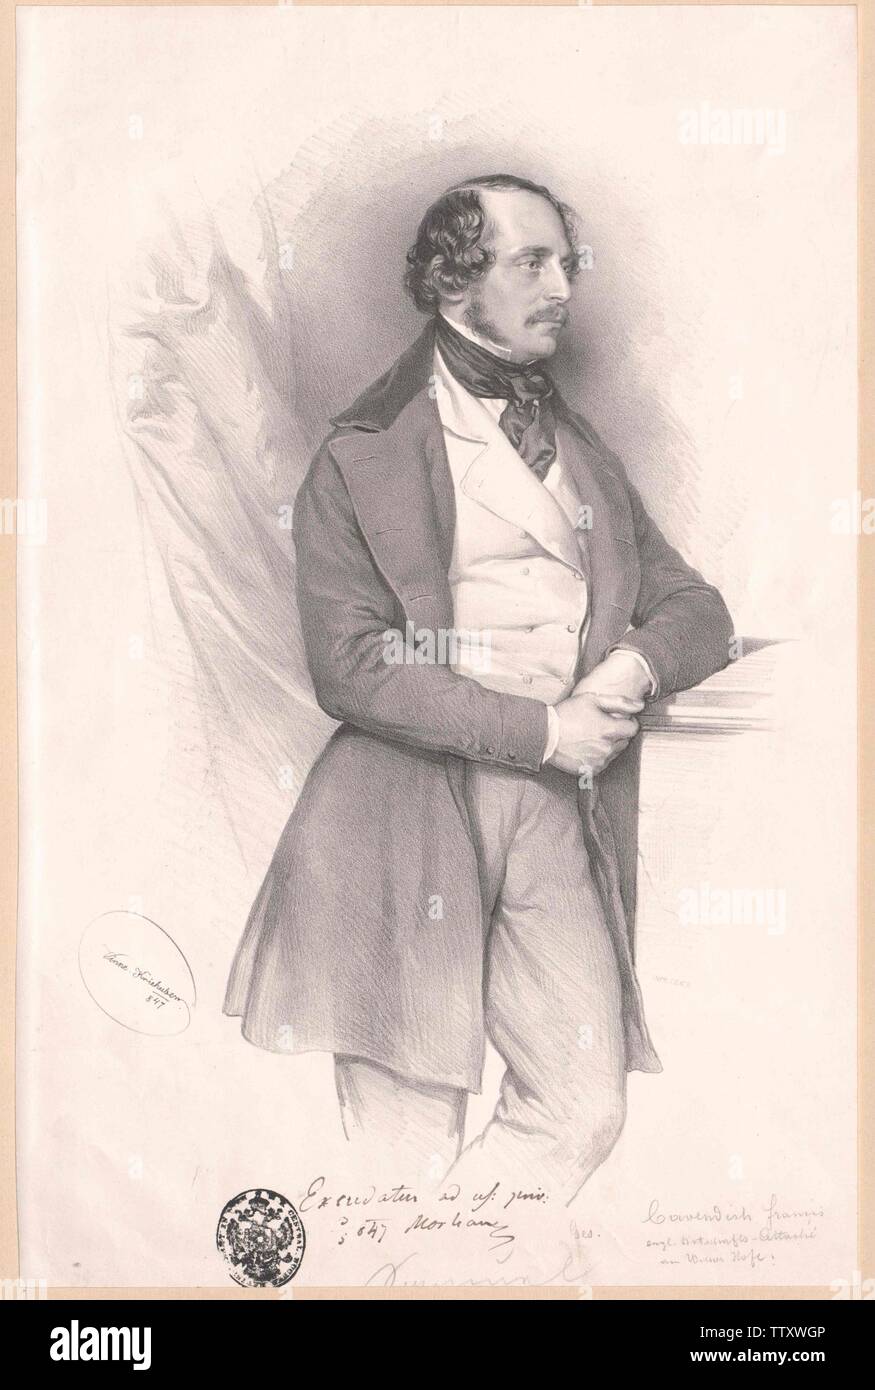 Cavendish tabacco, Francesco, vissuto circa 1847, Additional-Rights-Clearance-Info-Not-Available Foto Stock